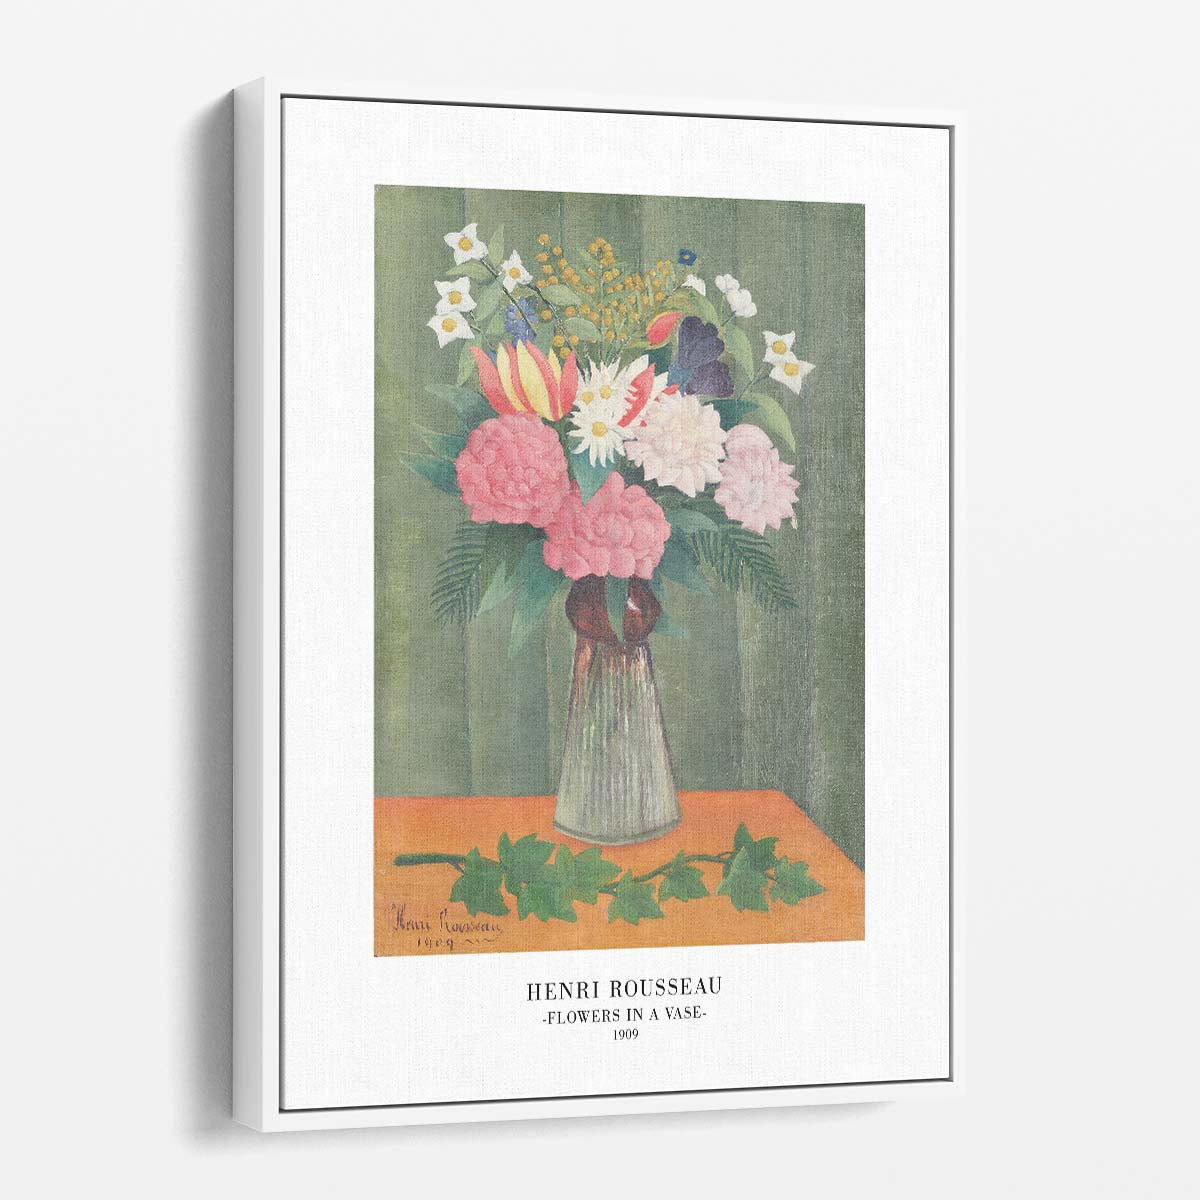 Floral Masterpiece 'Flowers in a Vase' by Henri Rousseau, Acrylic Illustration Poster by Luxuriance Designs, made in USA